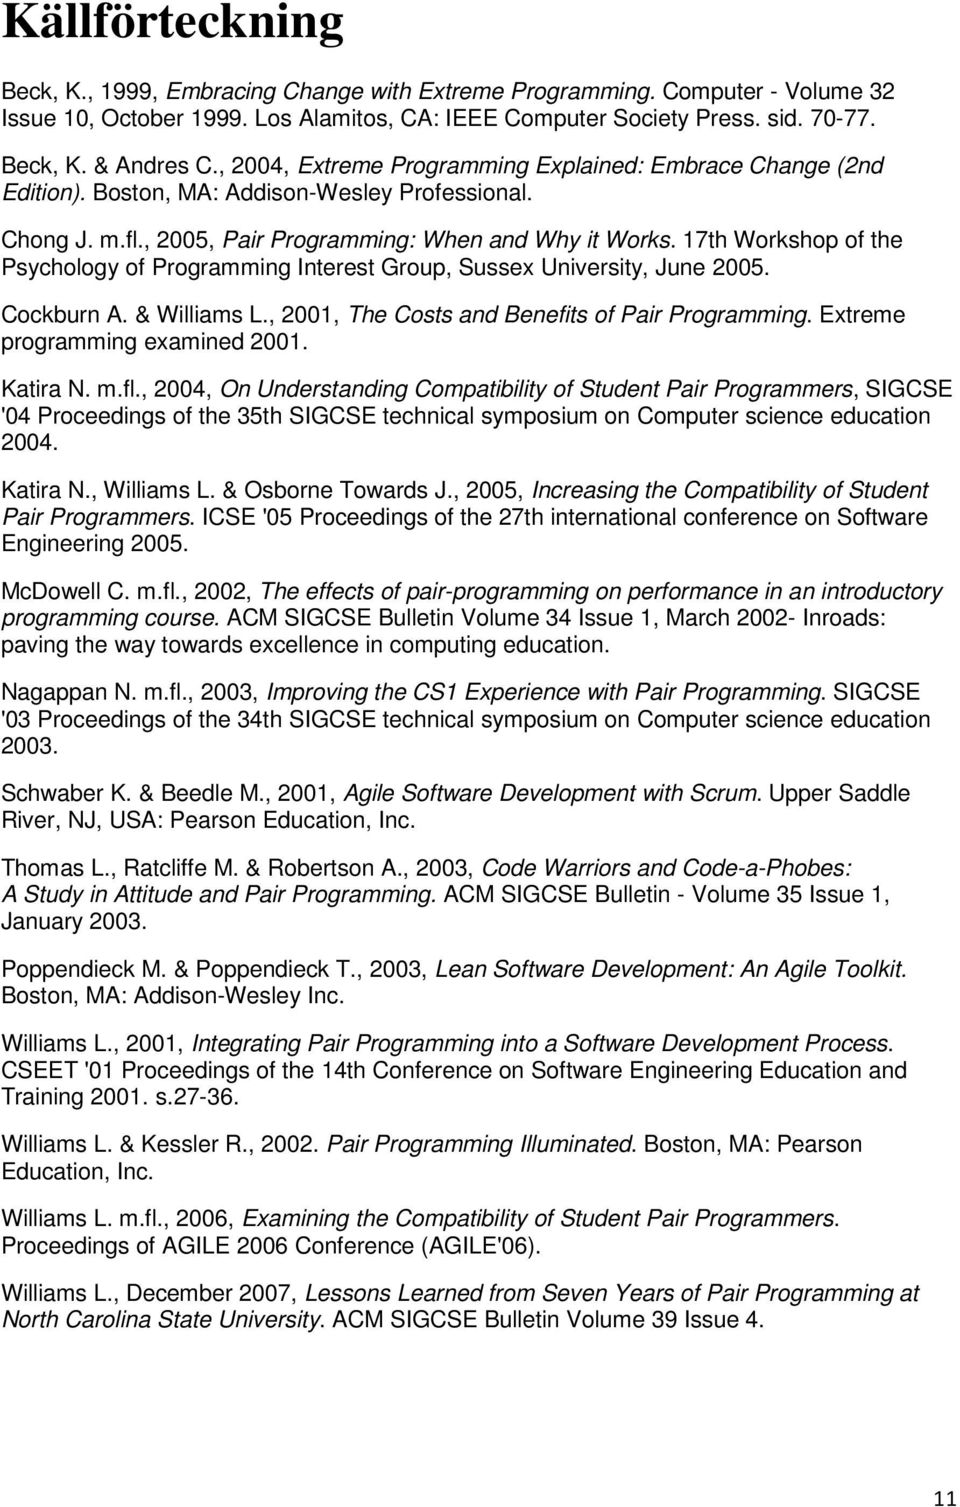 17th Workshop of the Psychology of Programming Interest Group, Sussex University, June 2005. Cockburn A. & Williams L., 2001, The Costs and Benefits of Pair Programming.